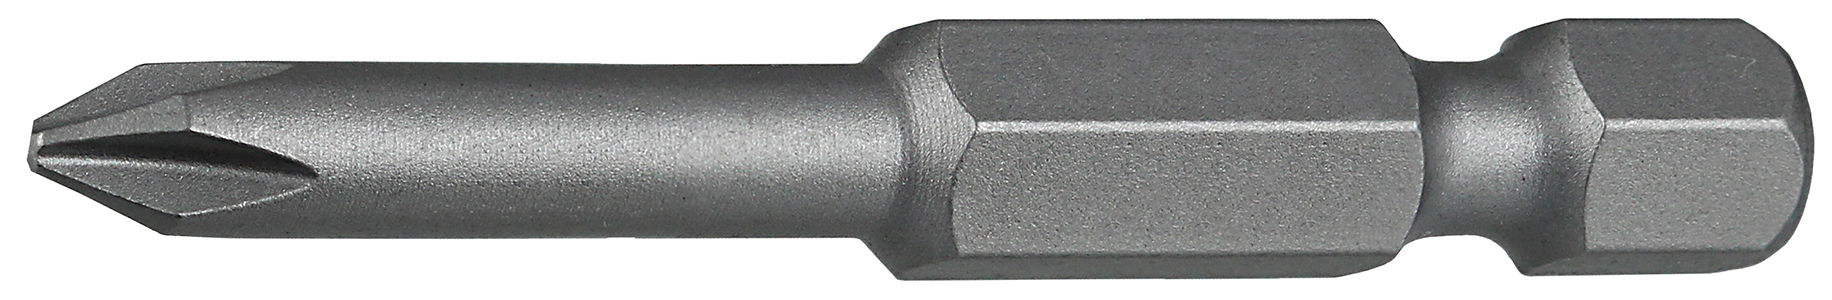 Power Bit, #1 tip size, Phillips tip type, 2 in. overall length, Hex shank shape, #6 screw size